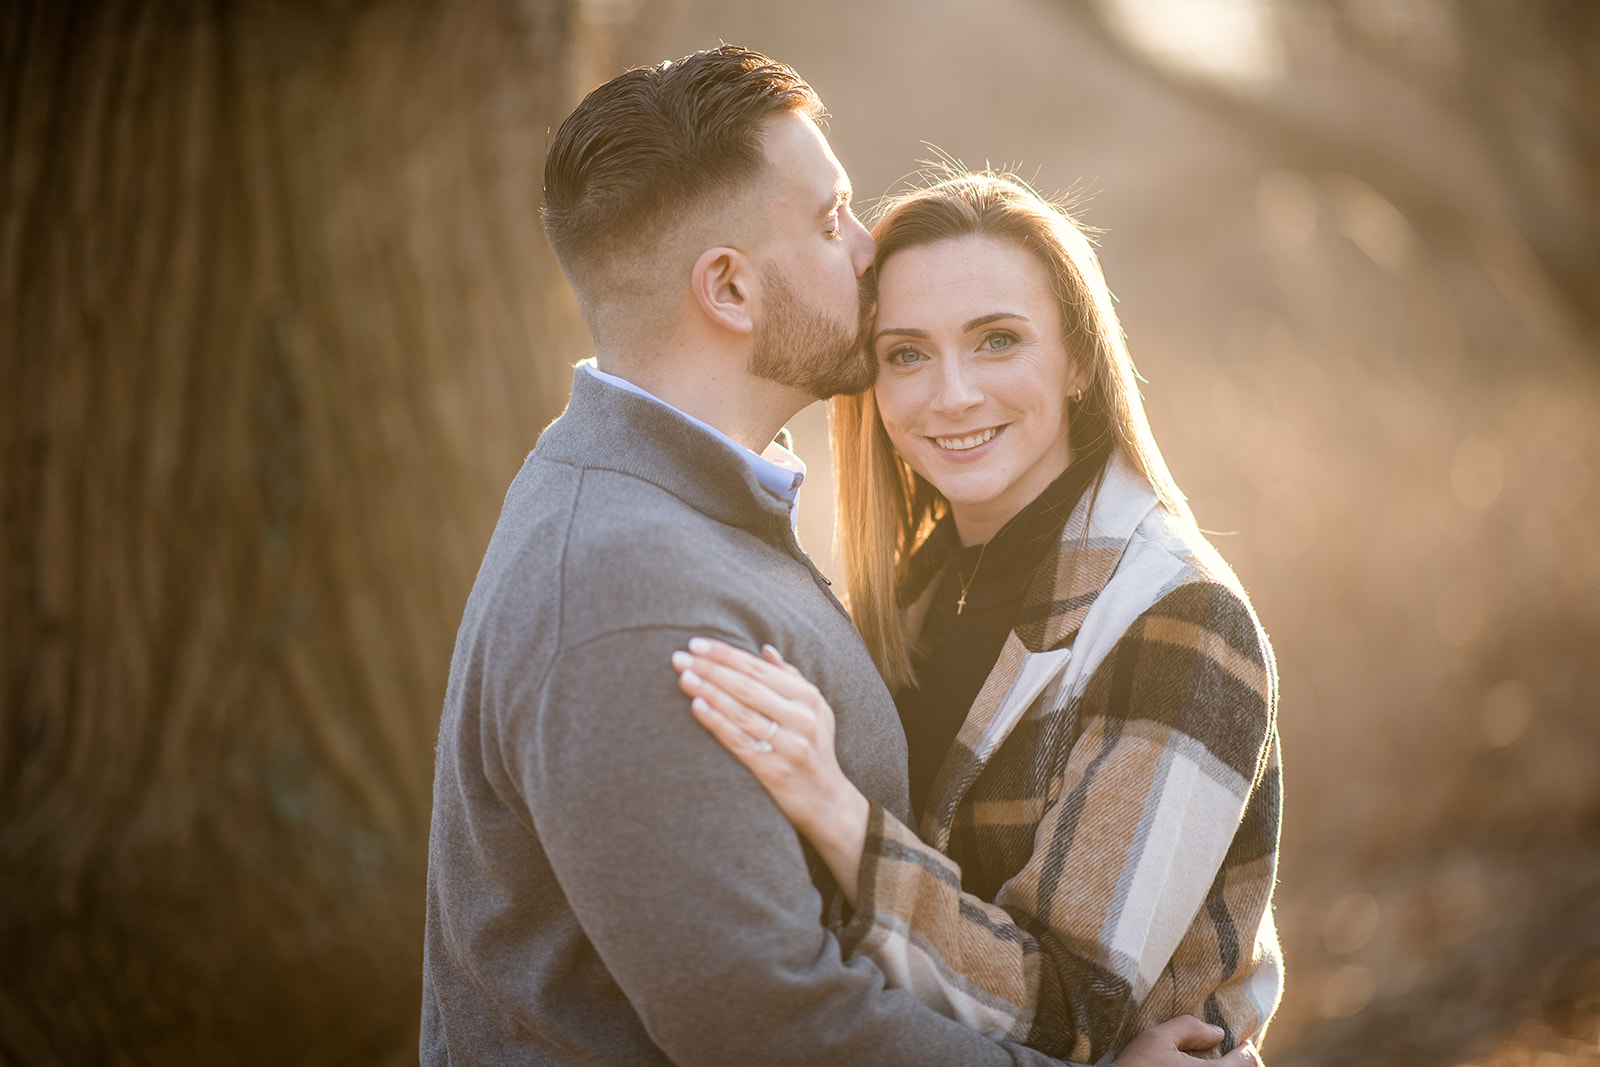 Sunset engagement photos at Planting fields